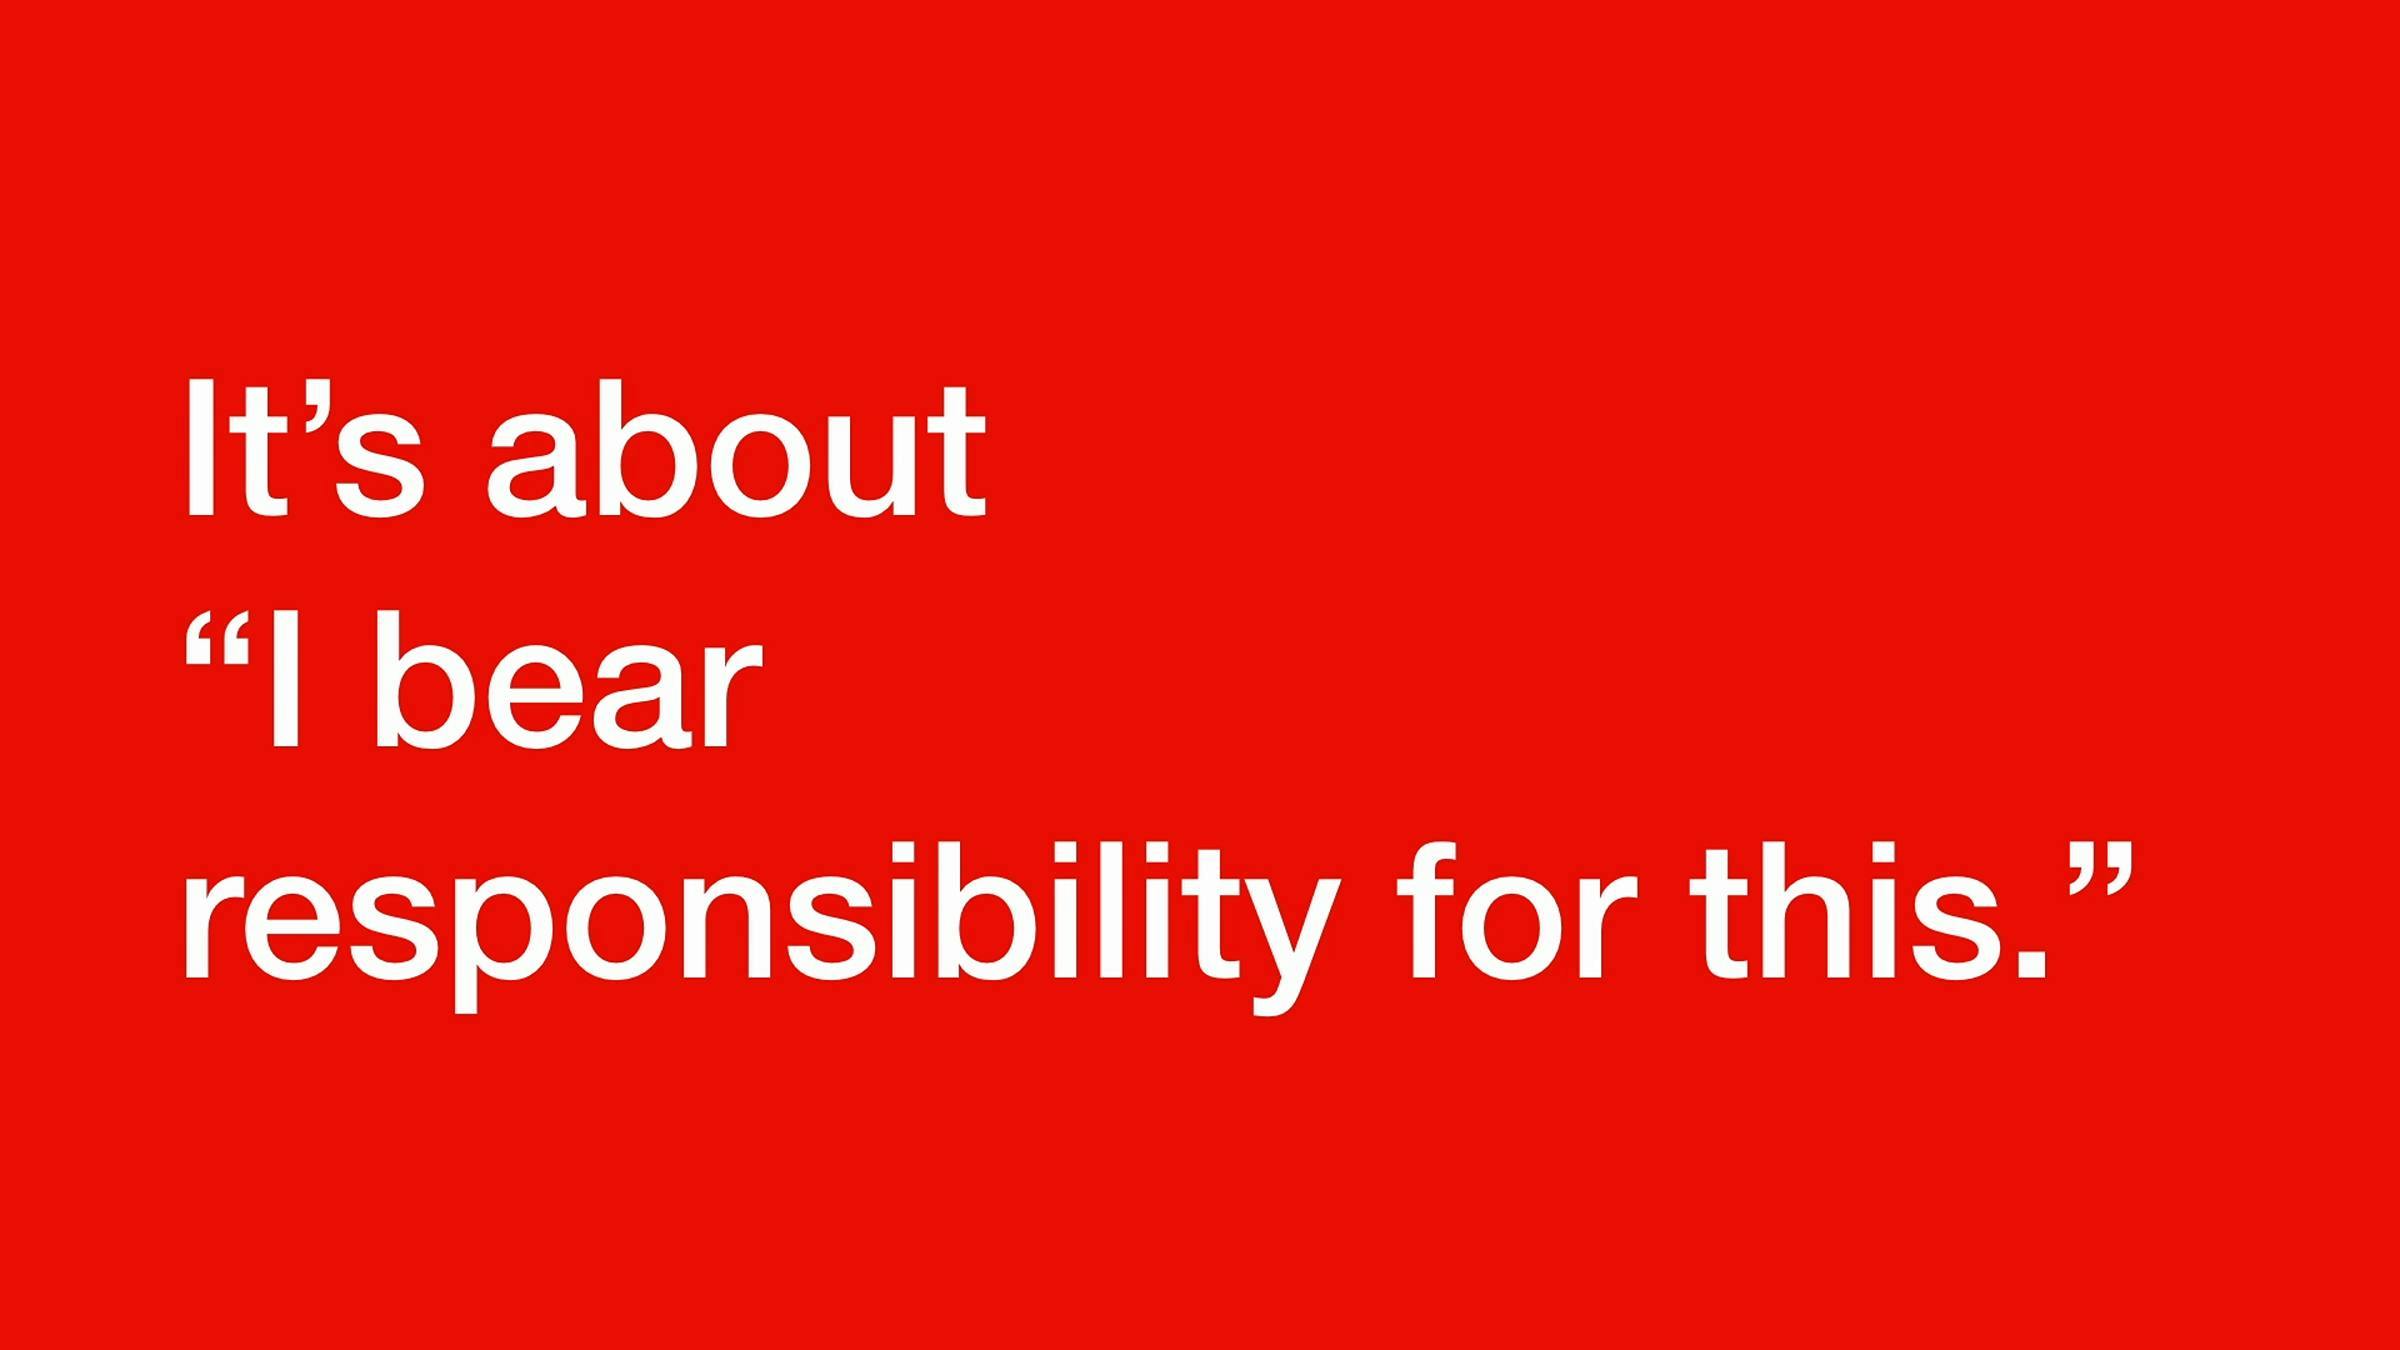 The words 'It's about "I bear responsibility for this." in white against a red background.